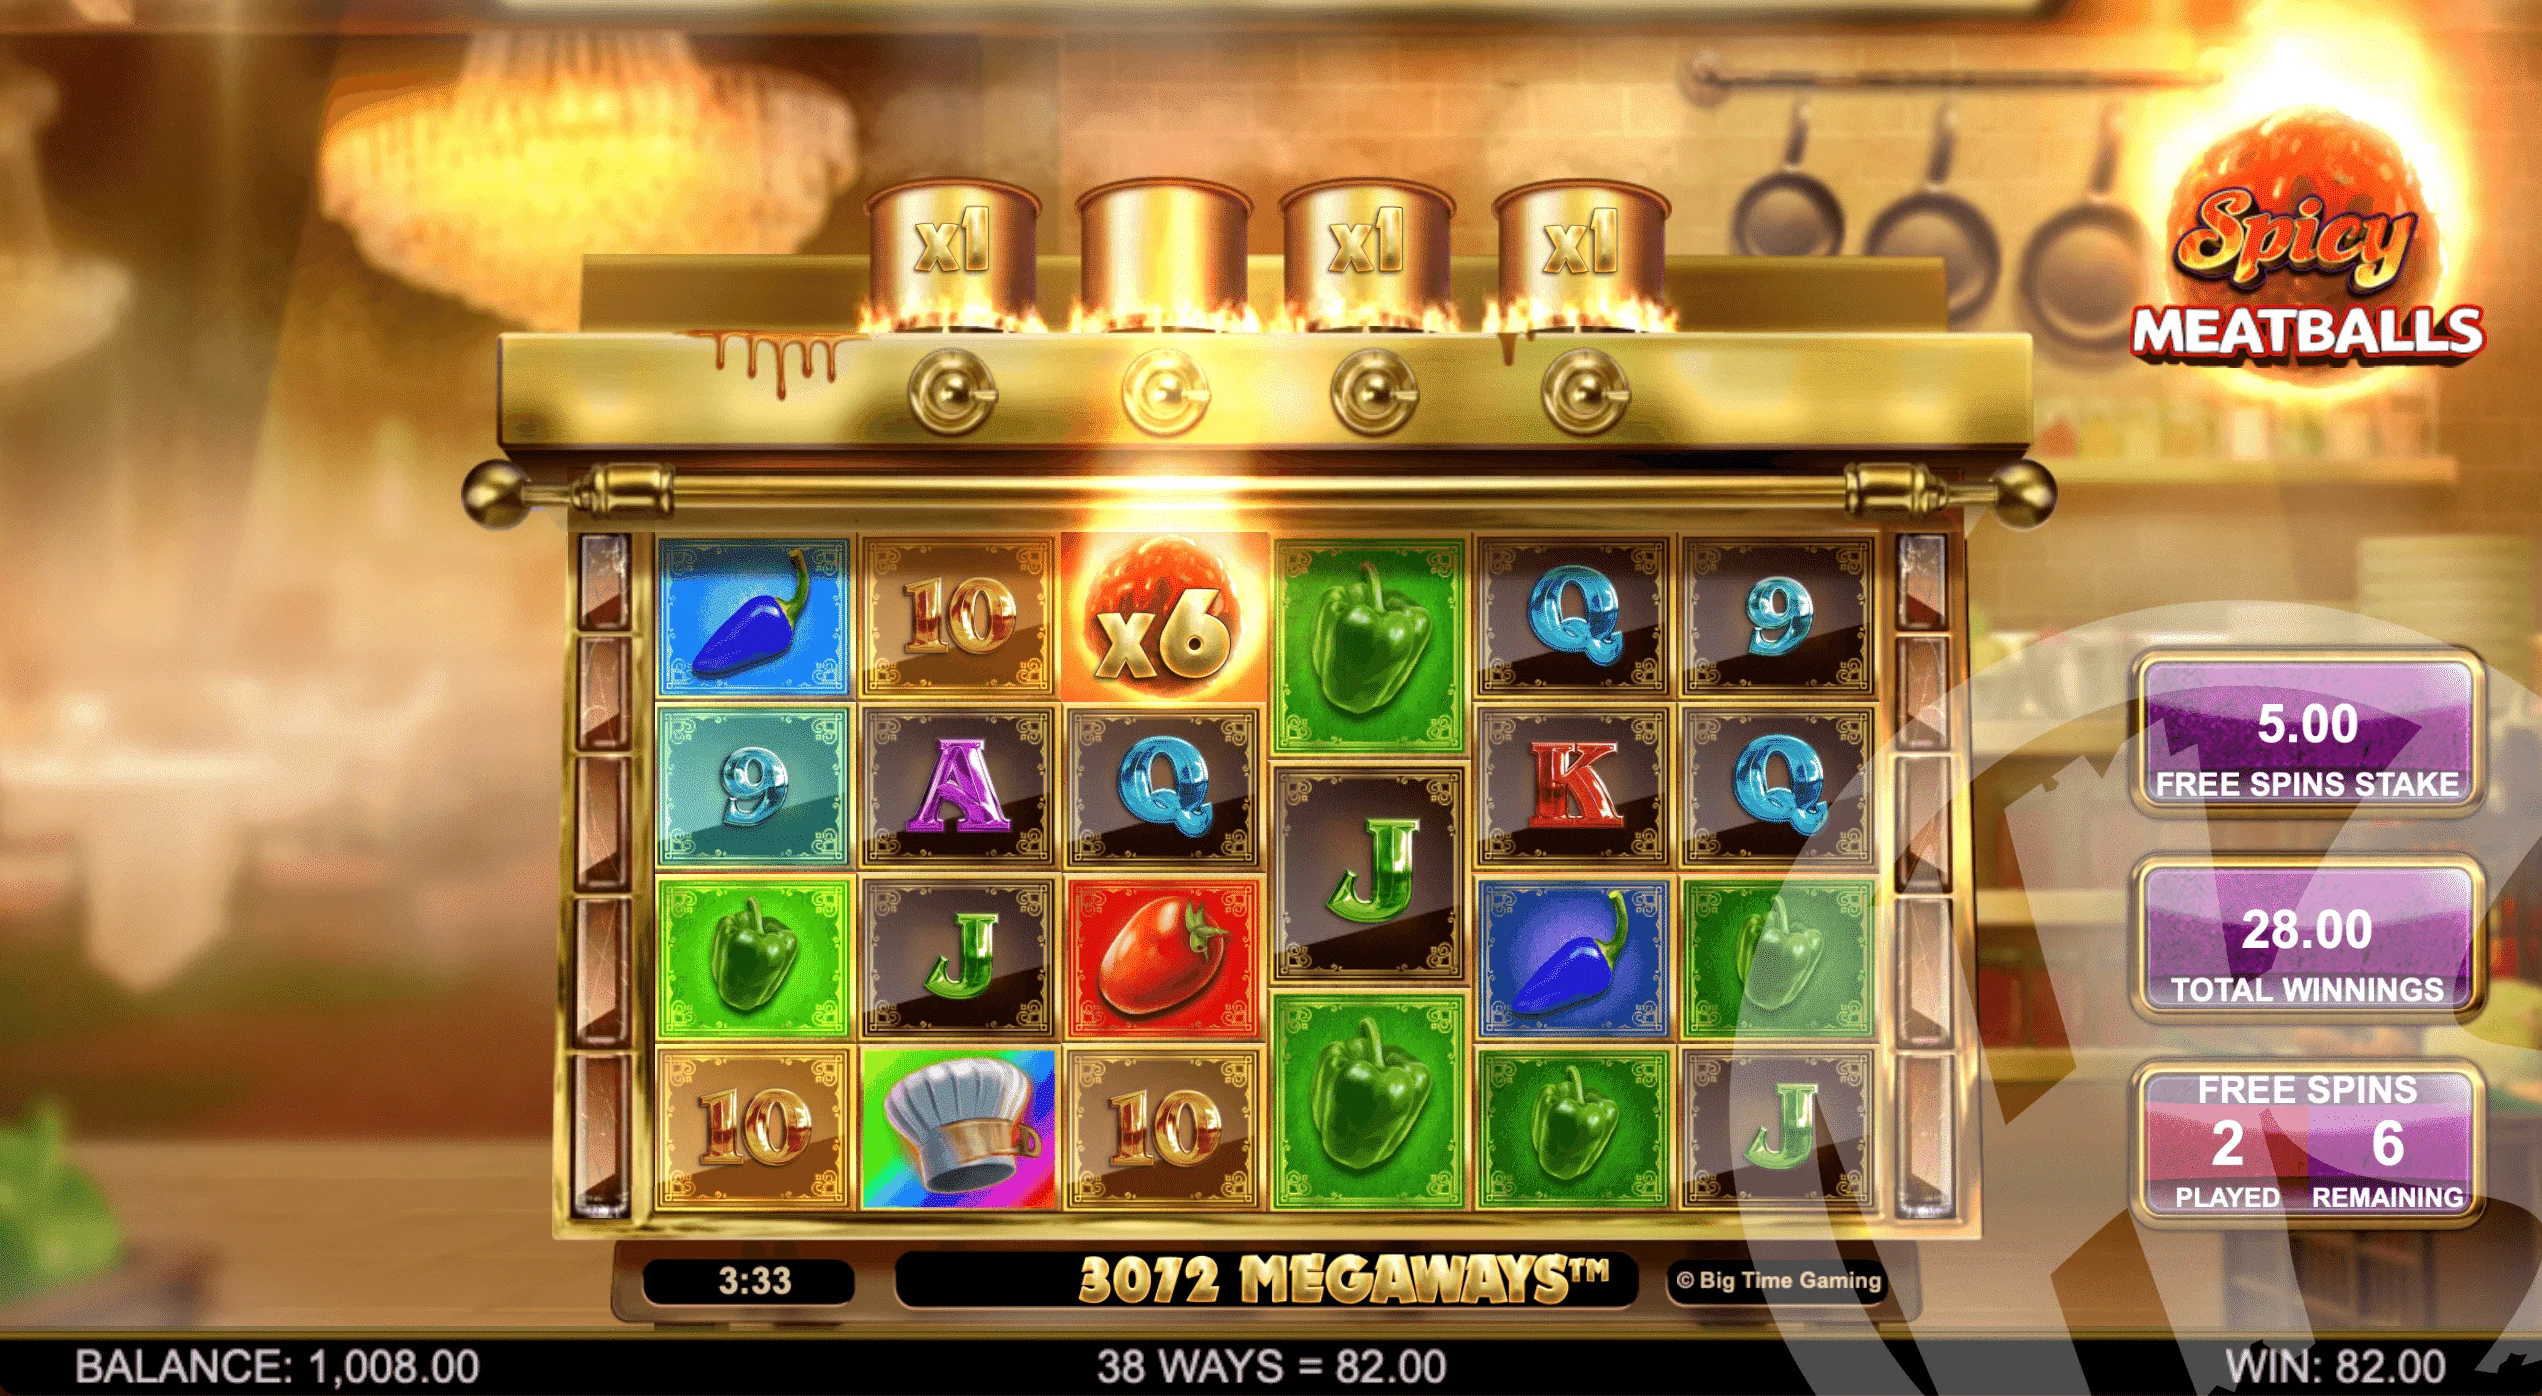 Multipliers Carry Over Into Free Spins